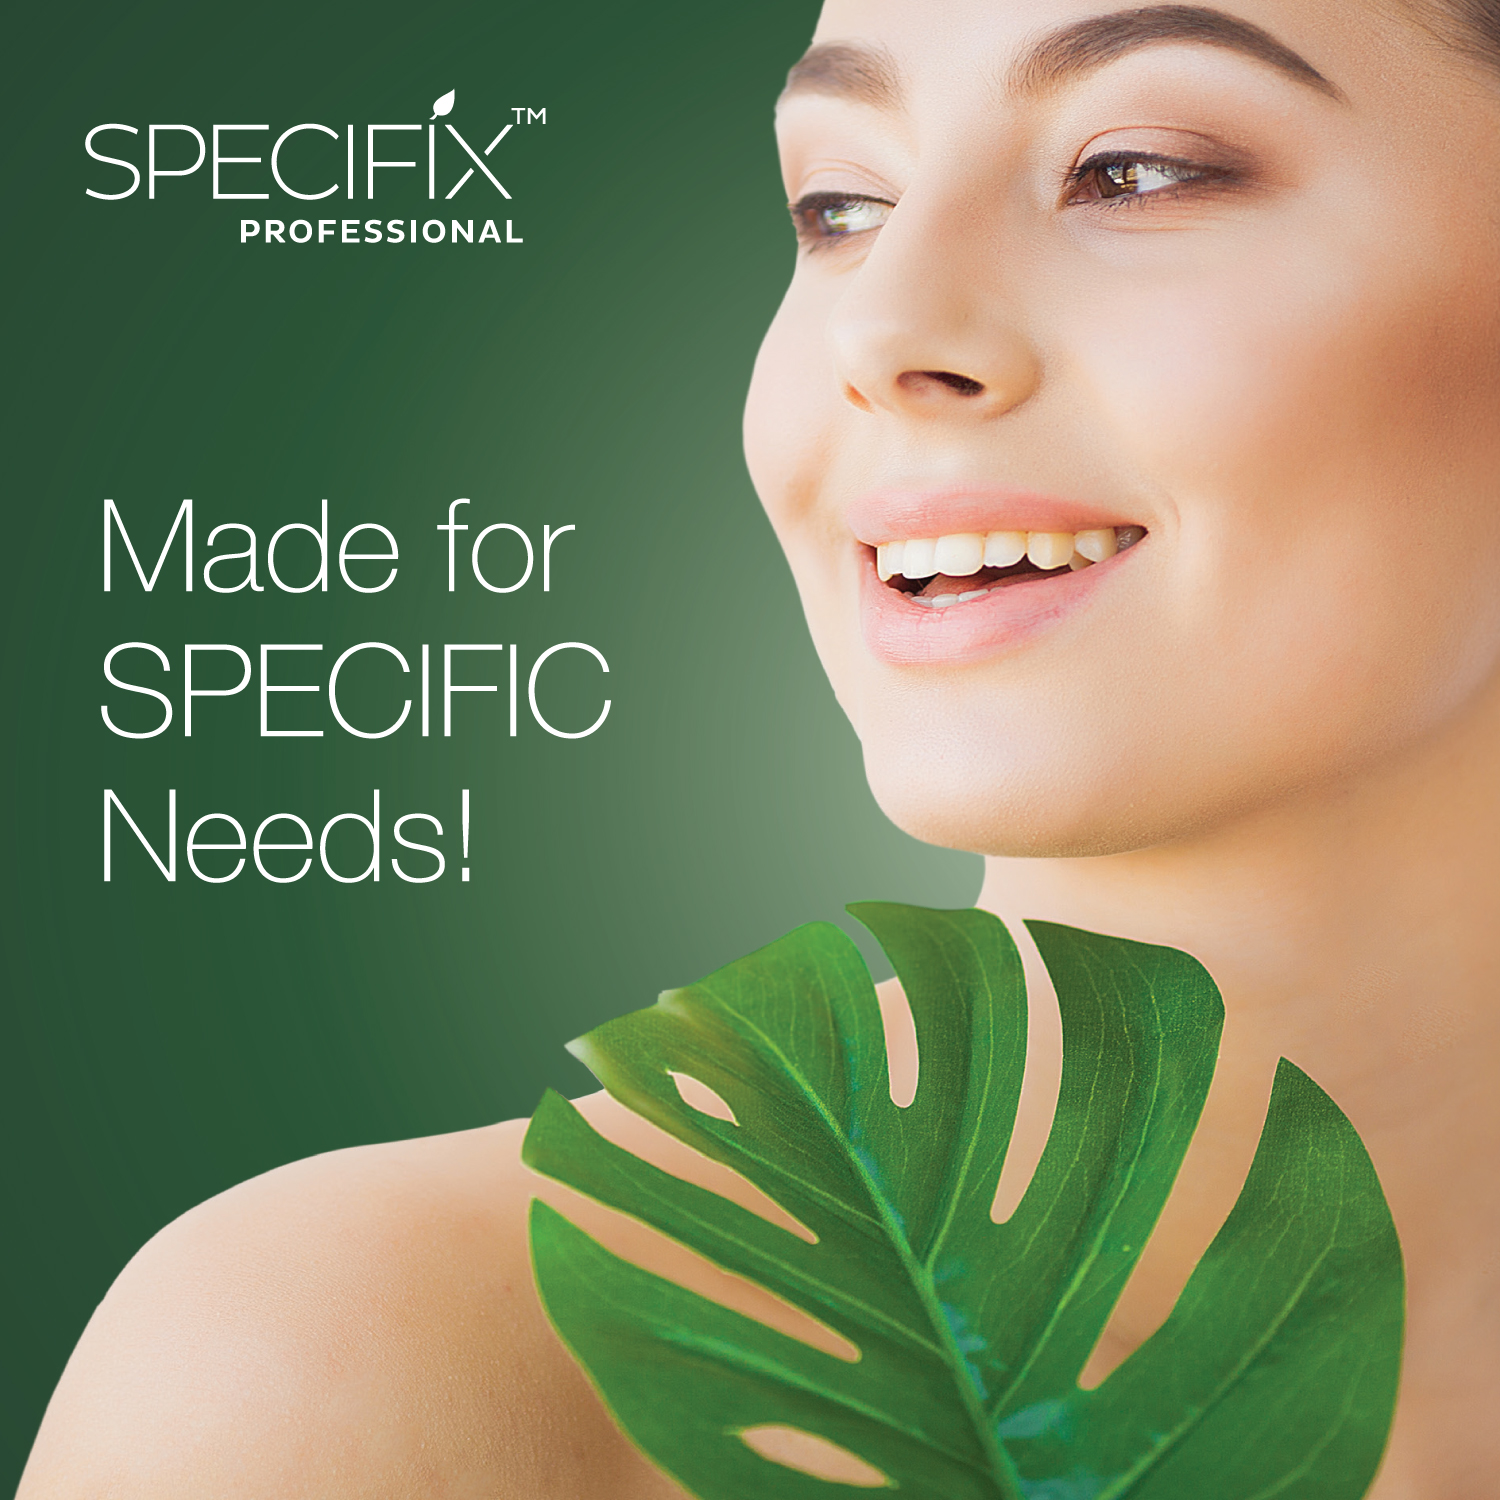 SPECIFIX™ PROFESSIONAL – For Specific Skin Needs